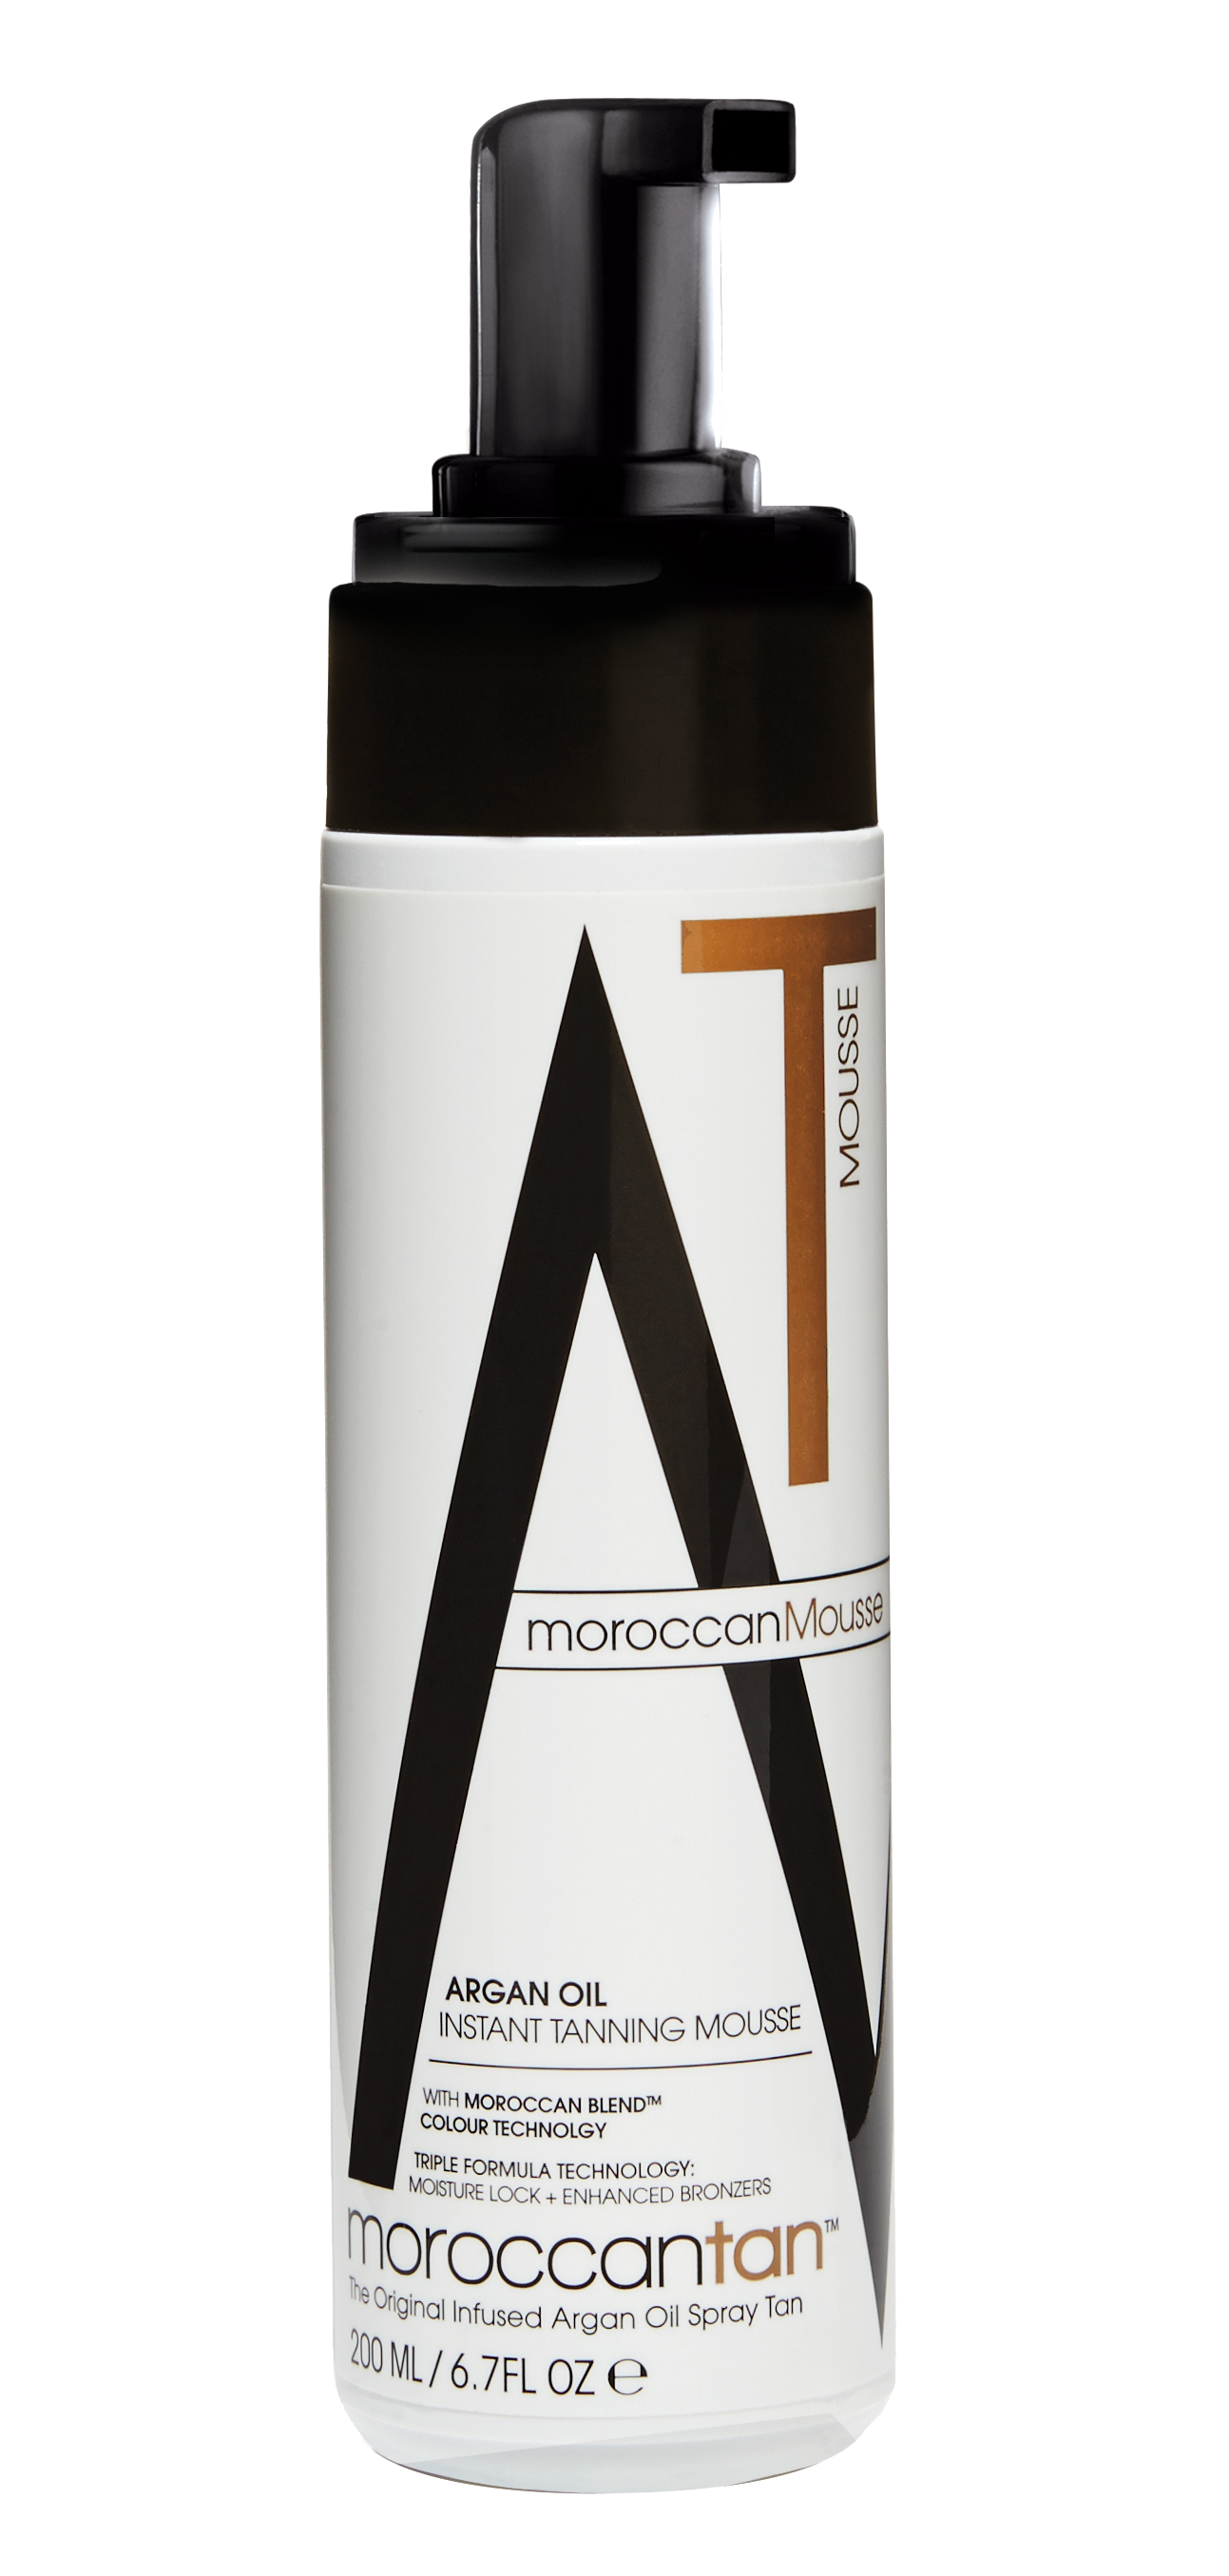 MoroccanTan Instant Tanning Mousse